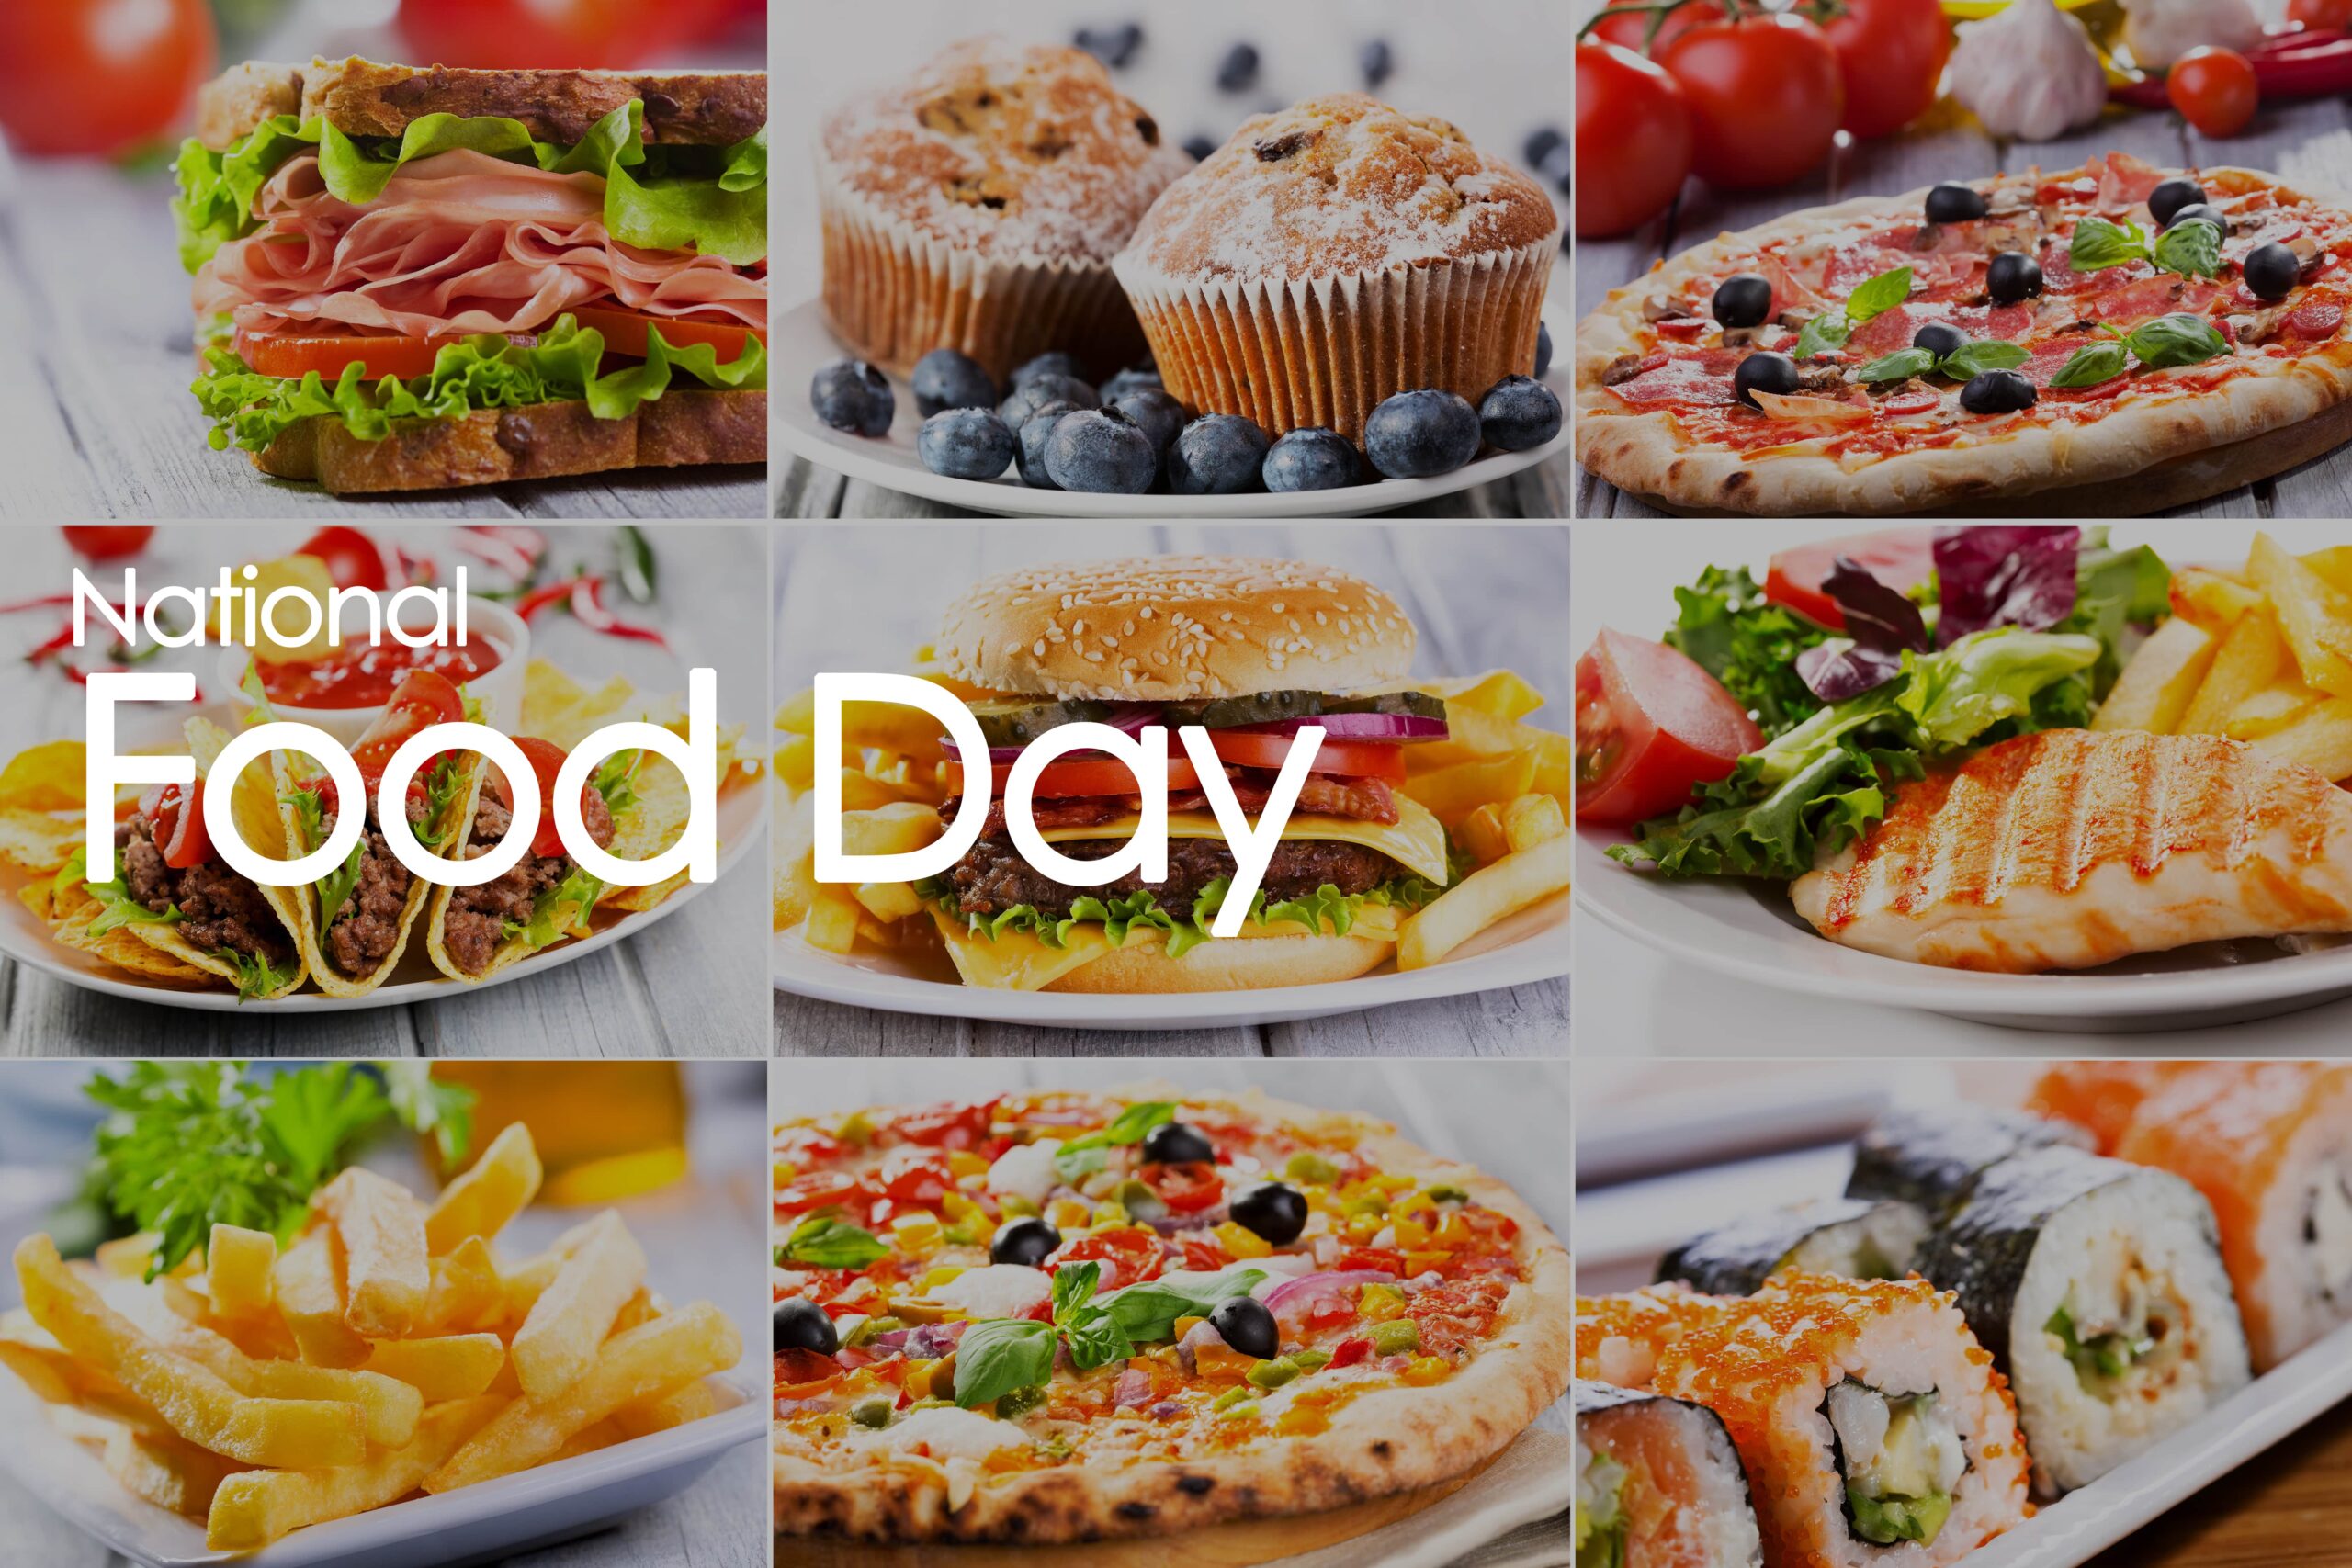 national-food-day-october-24th-ica-agency-alliance-inc